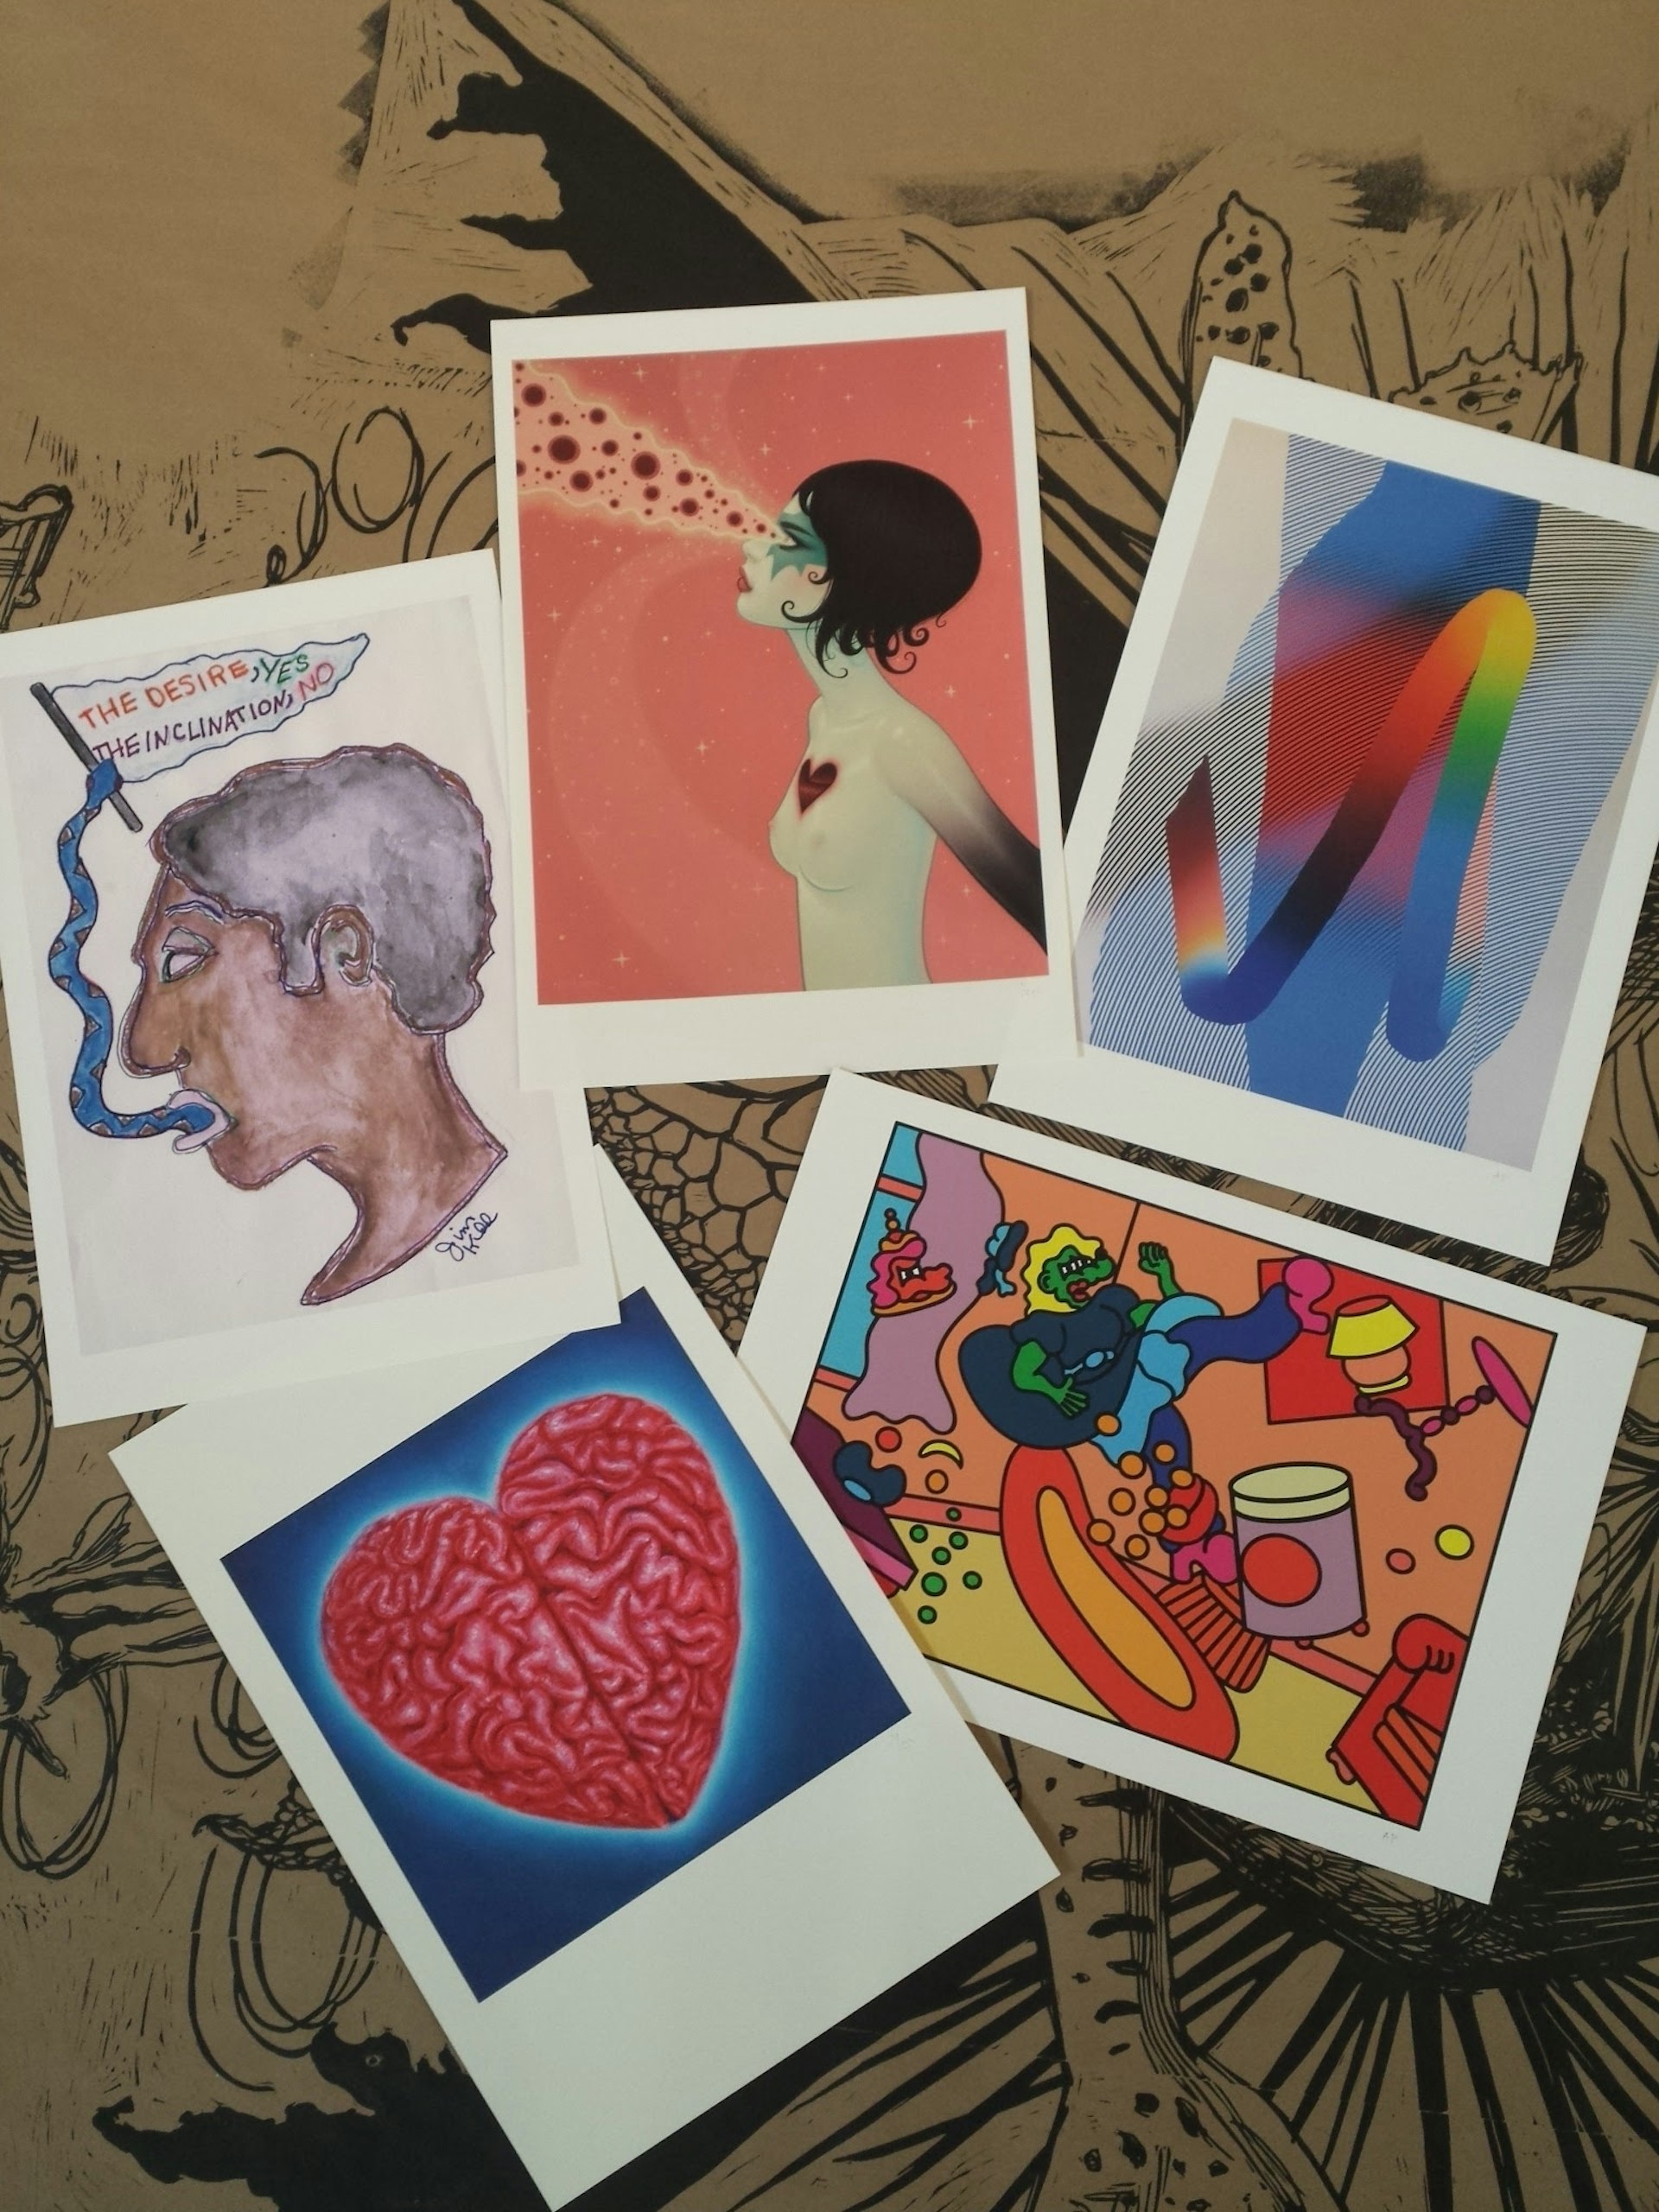 Some of the donated prints.